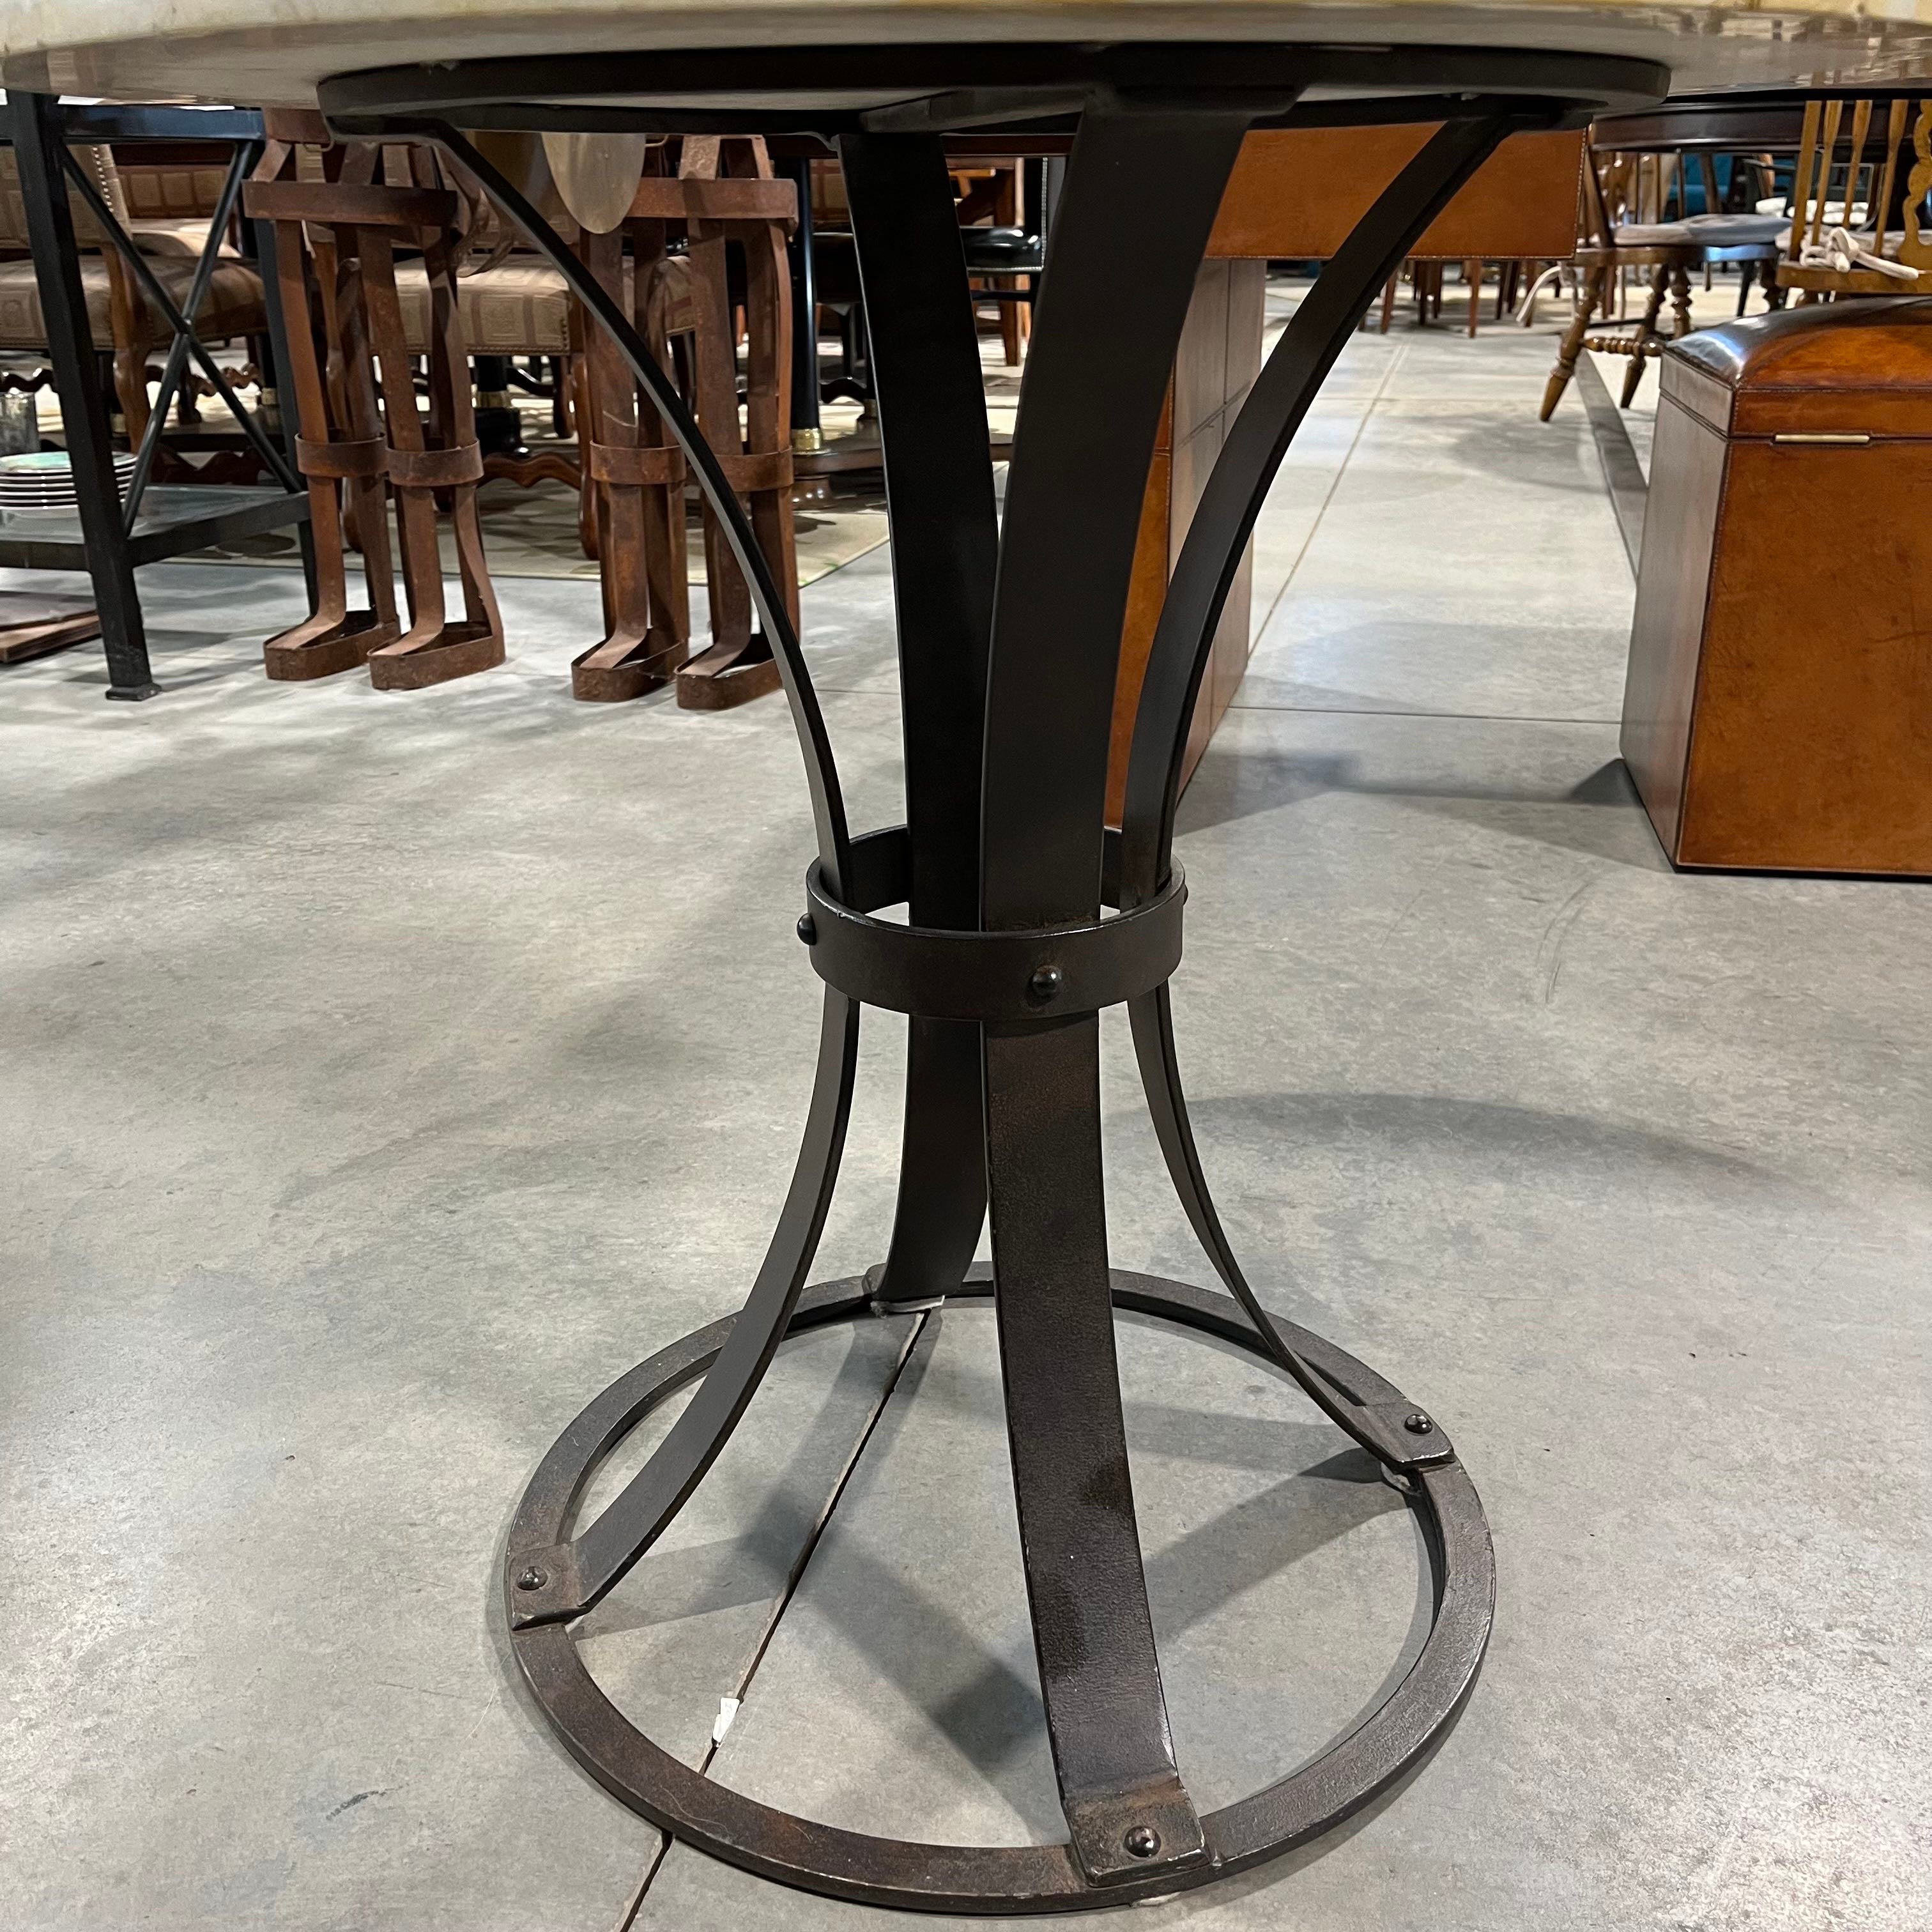 Round Beige Tan Stone Iron Base Accent Table